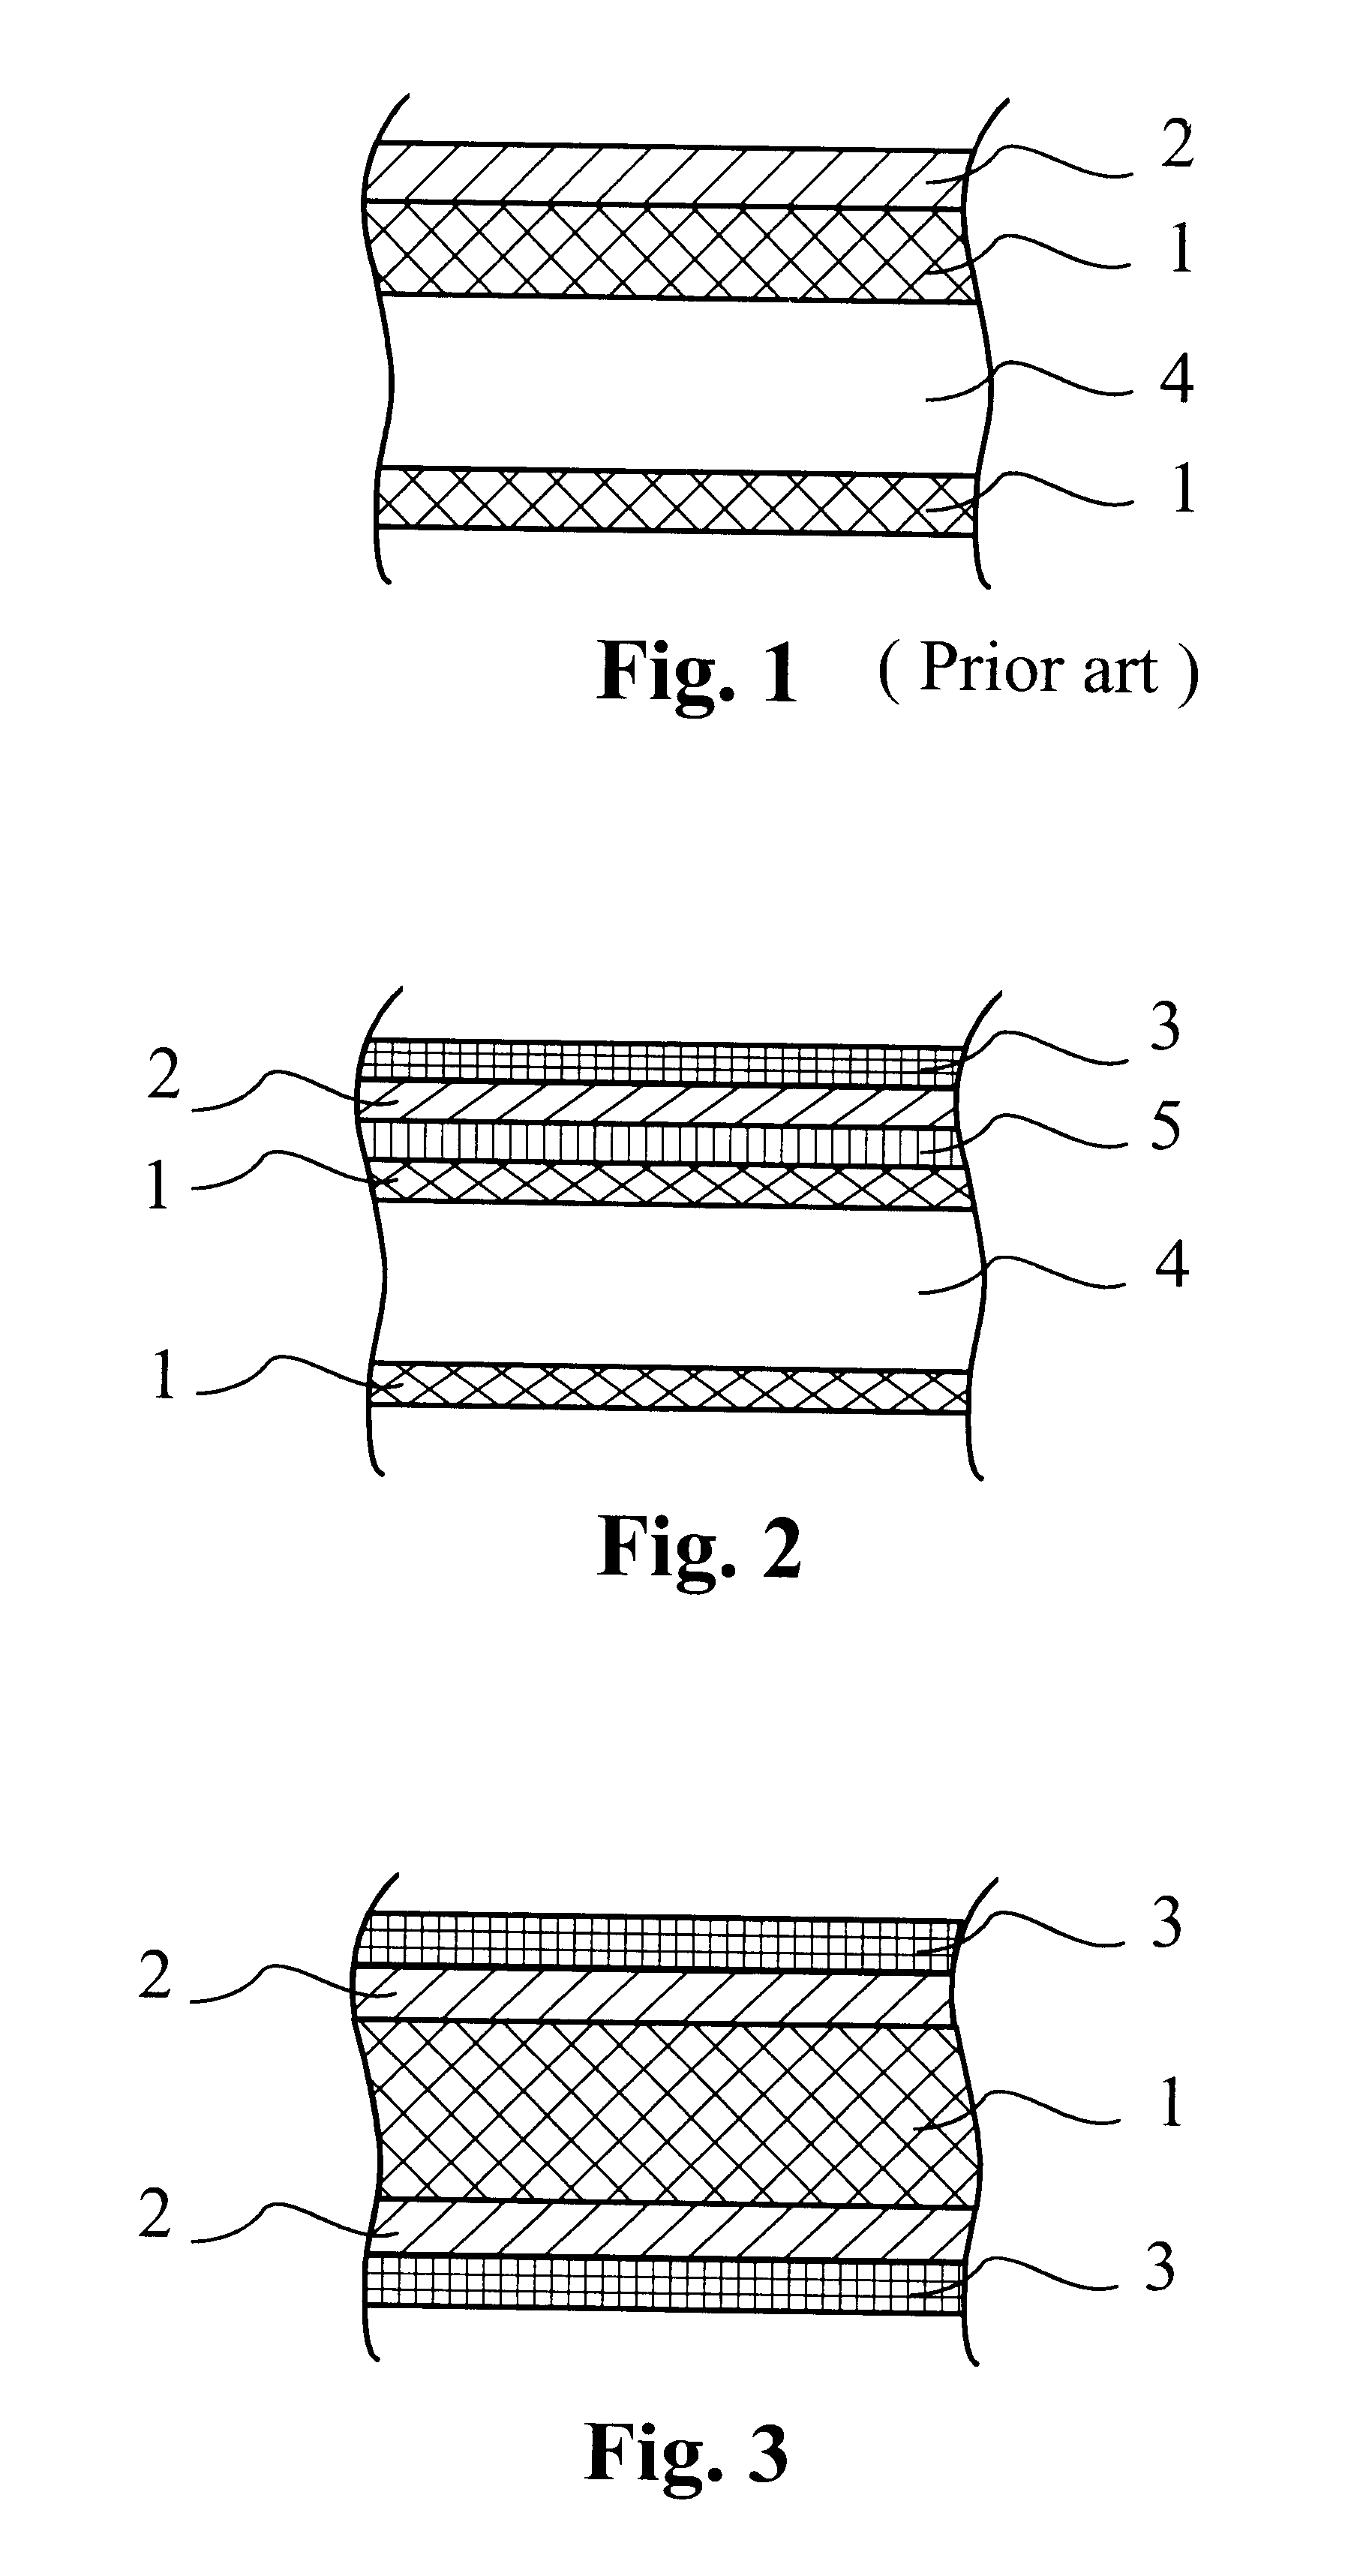 Brazing product having a low melting point